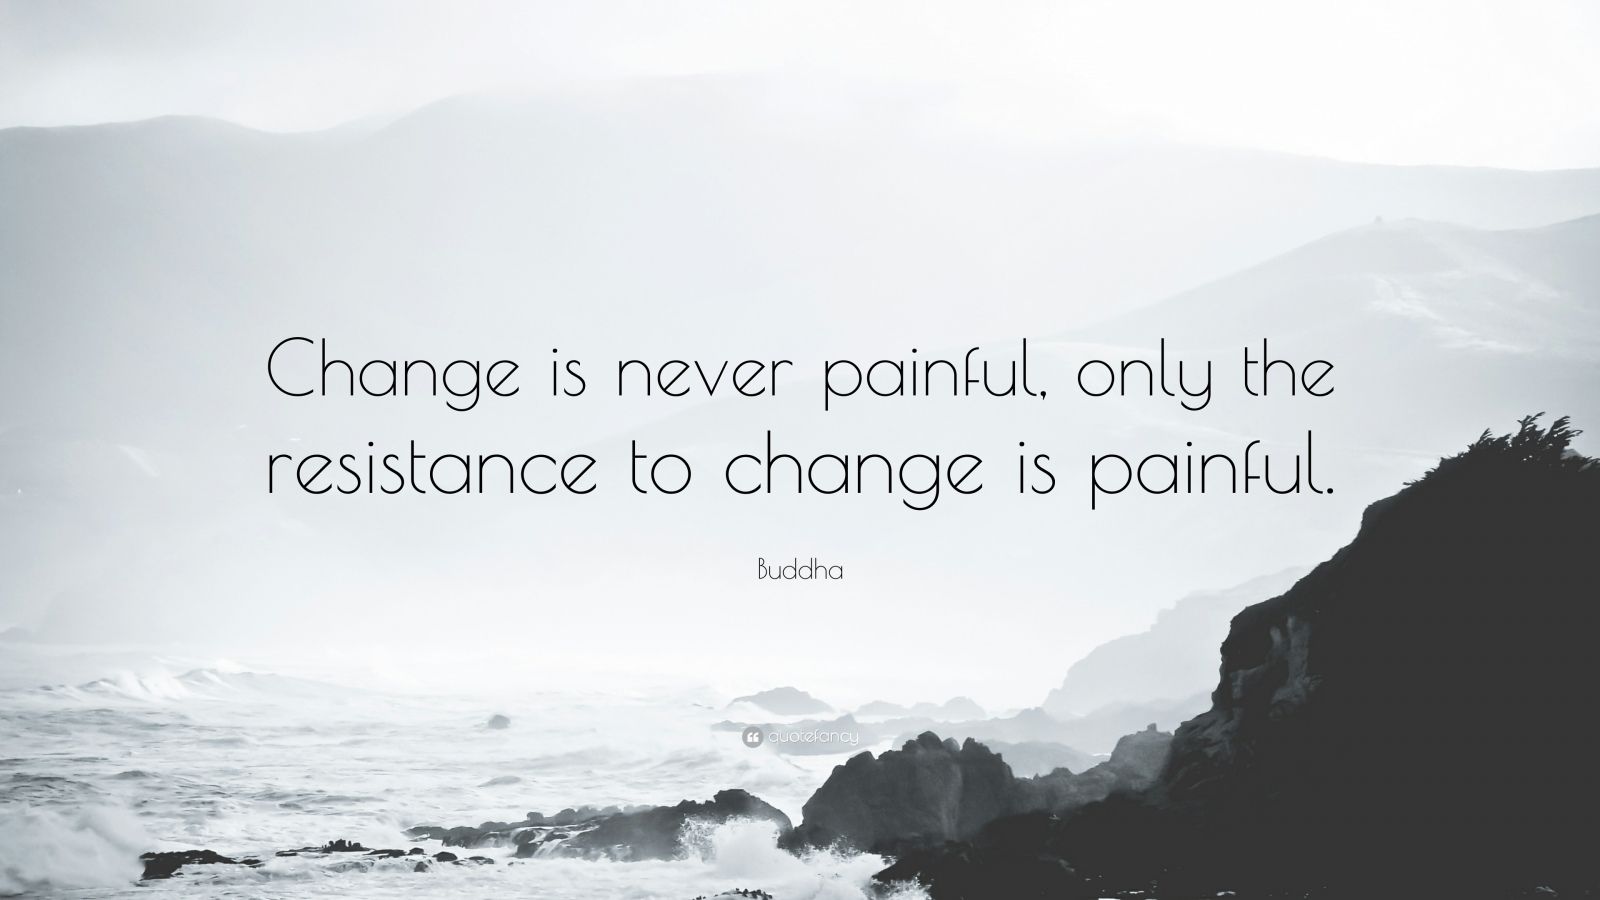 Buddha Quote: “Change is never painful, only the resistance to change